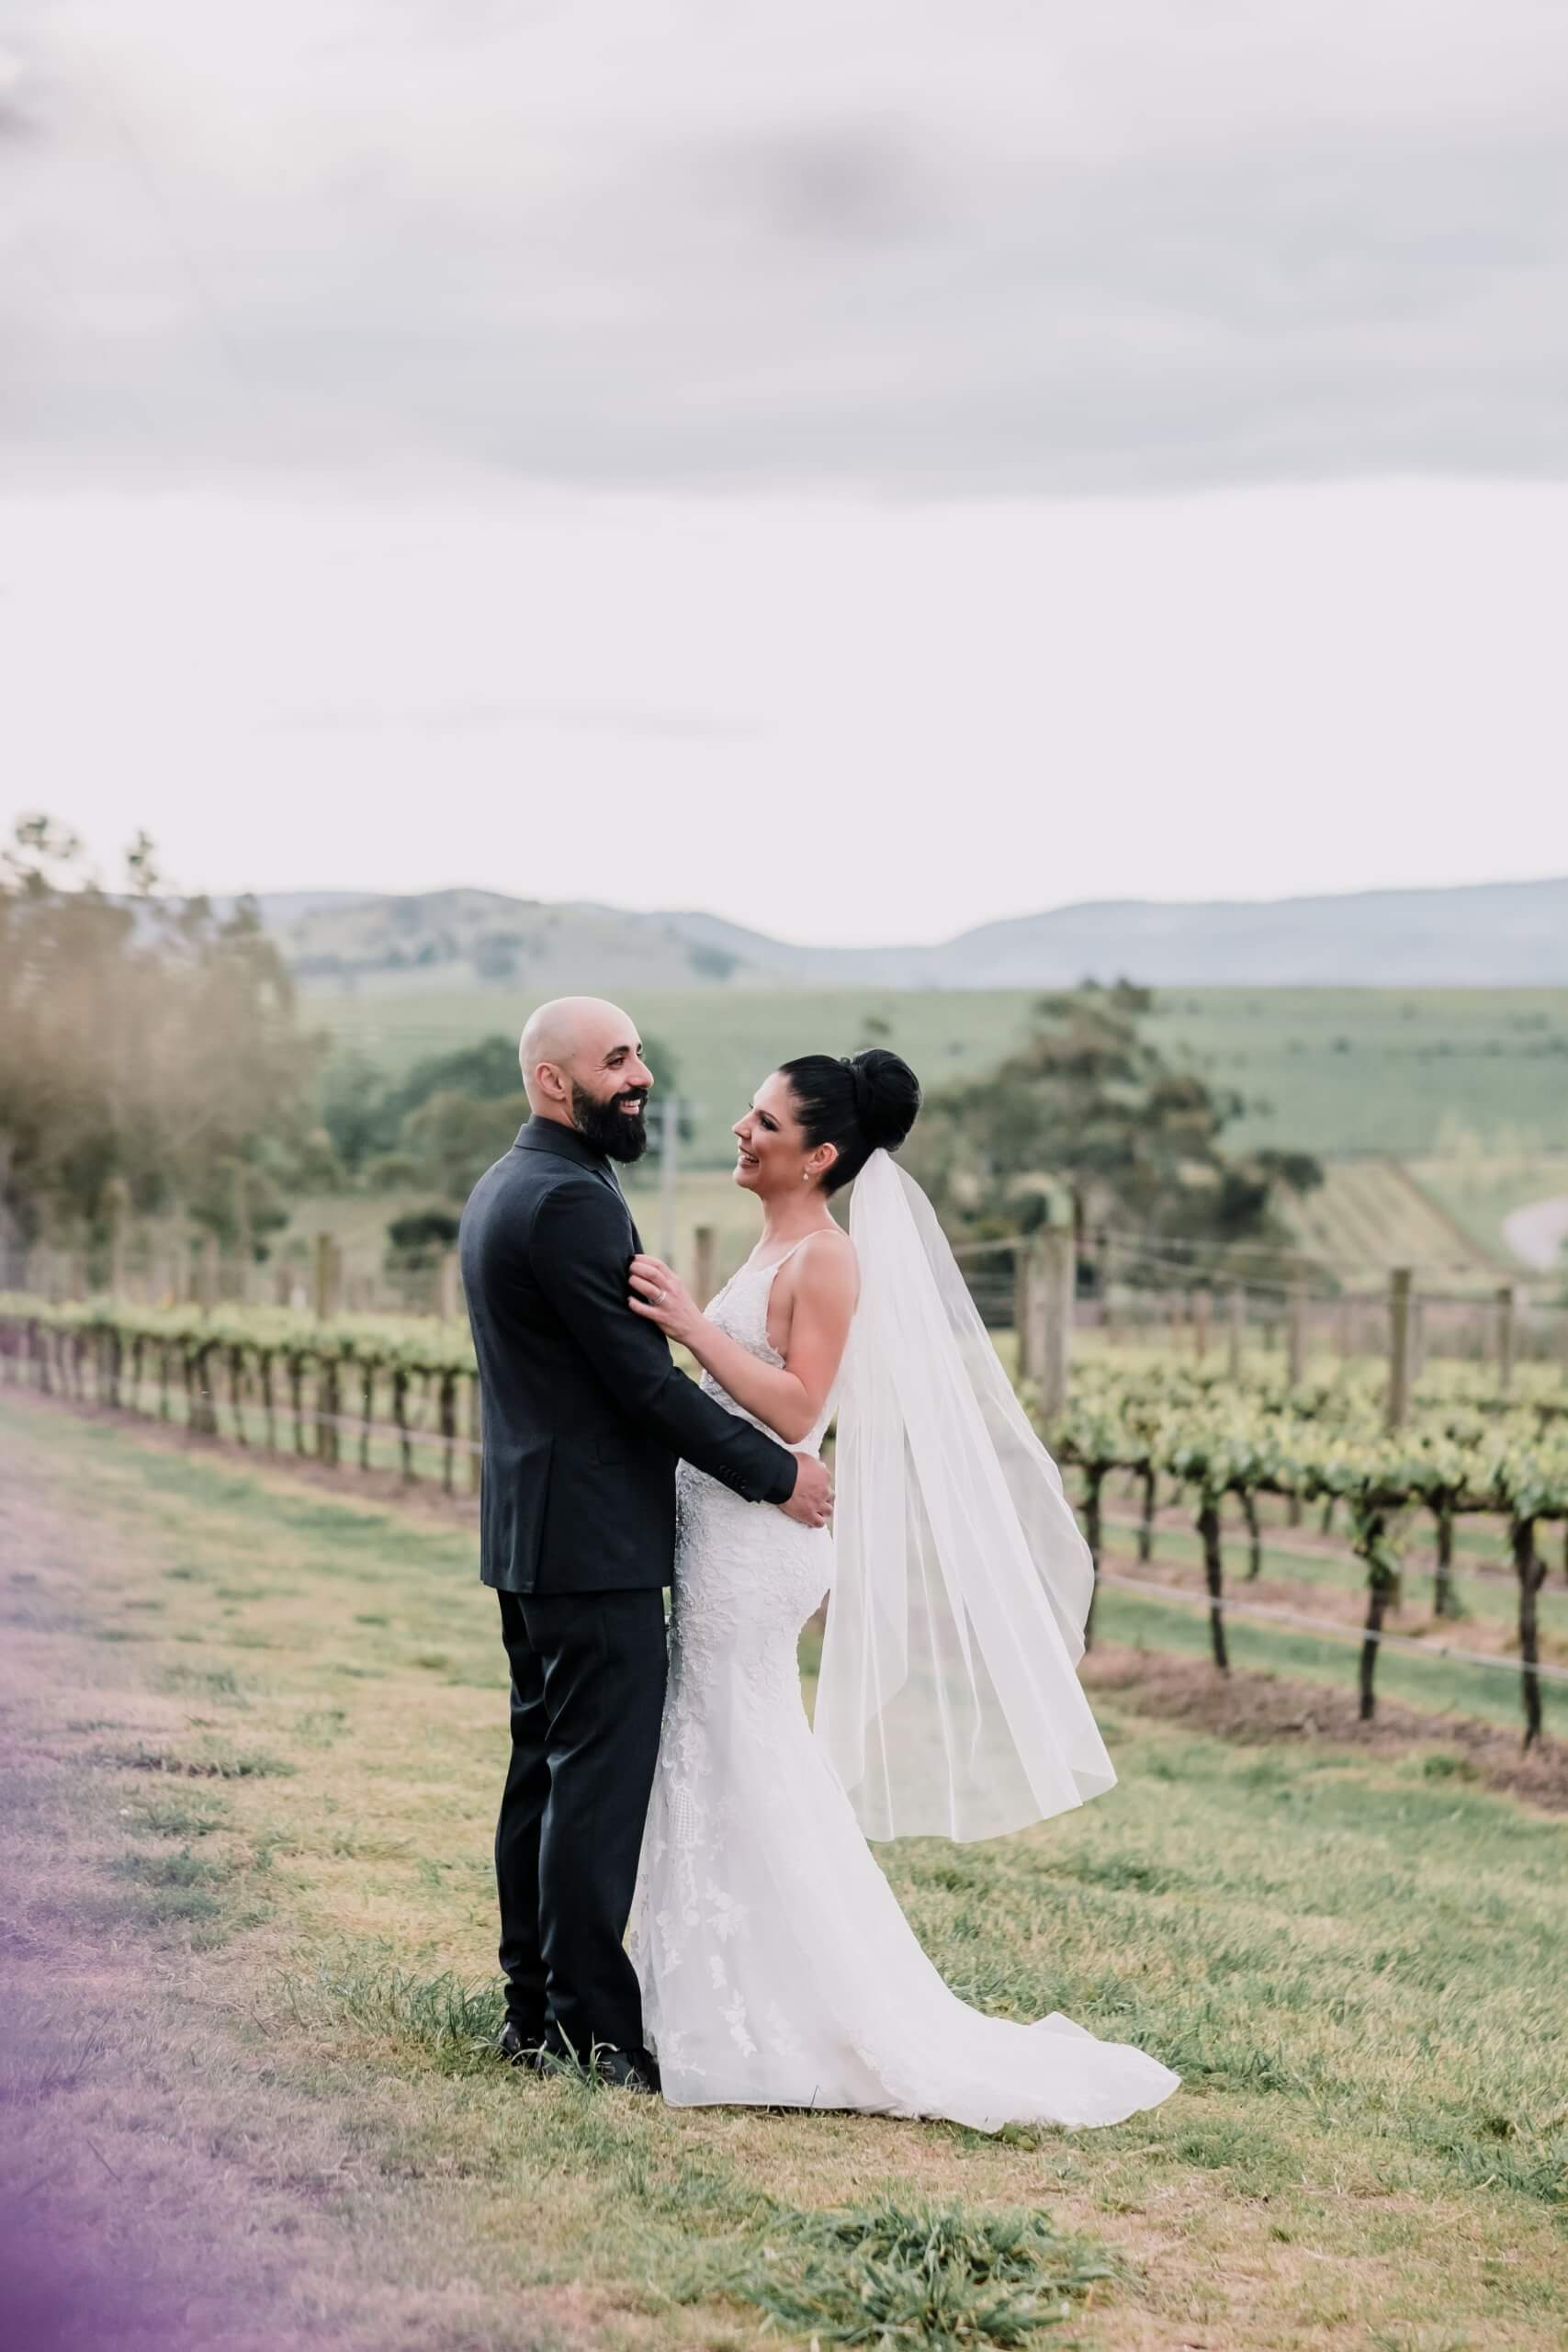 Bride and groom stands facing each other, smiling warmly in the middle of a vineyard.